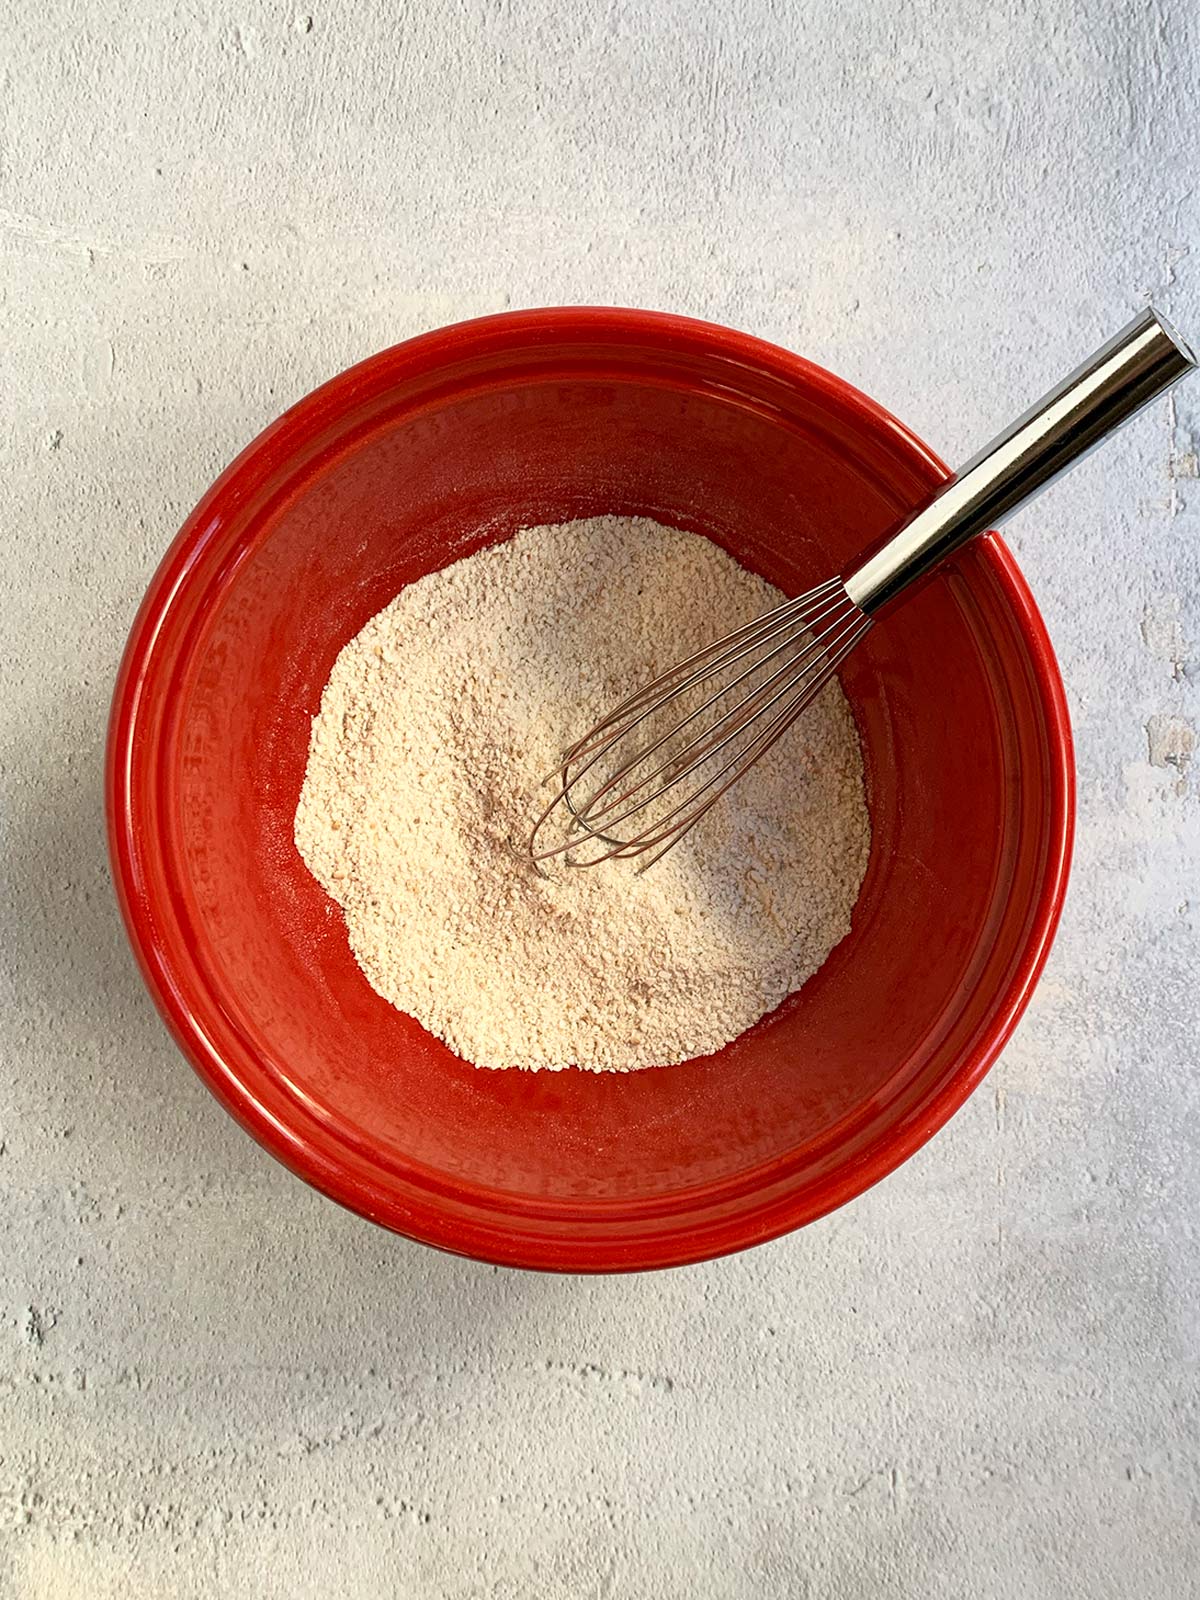 Dry matzo ball ingredients in a red bowl with a small whisk.